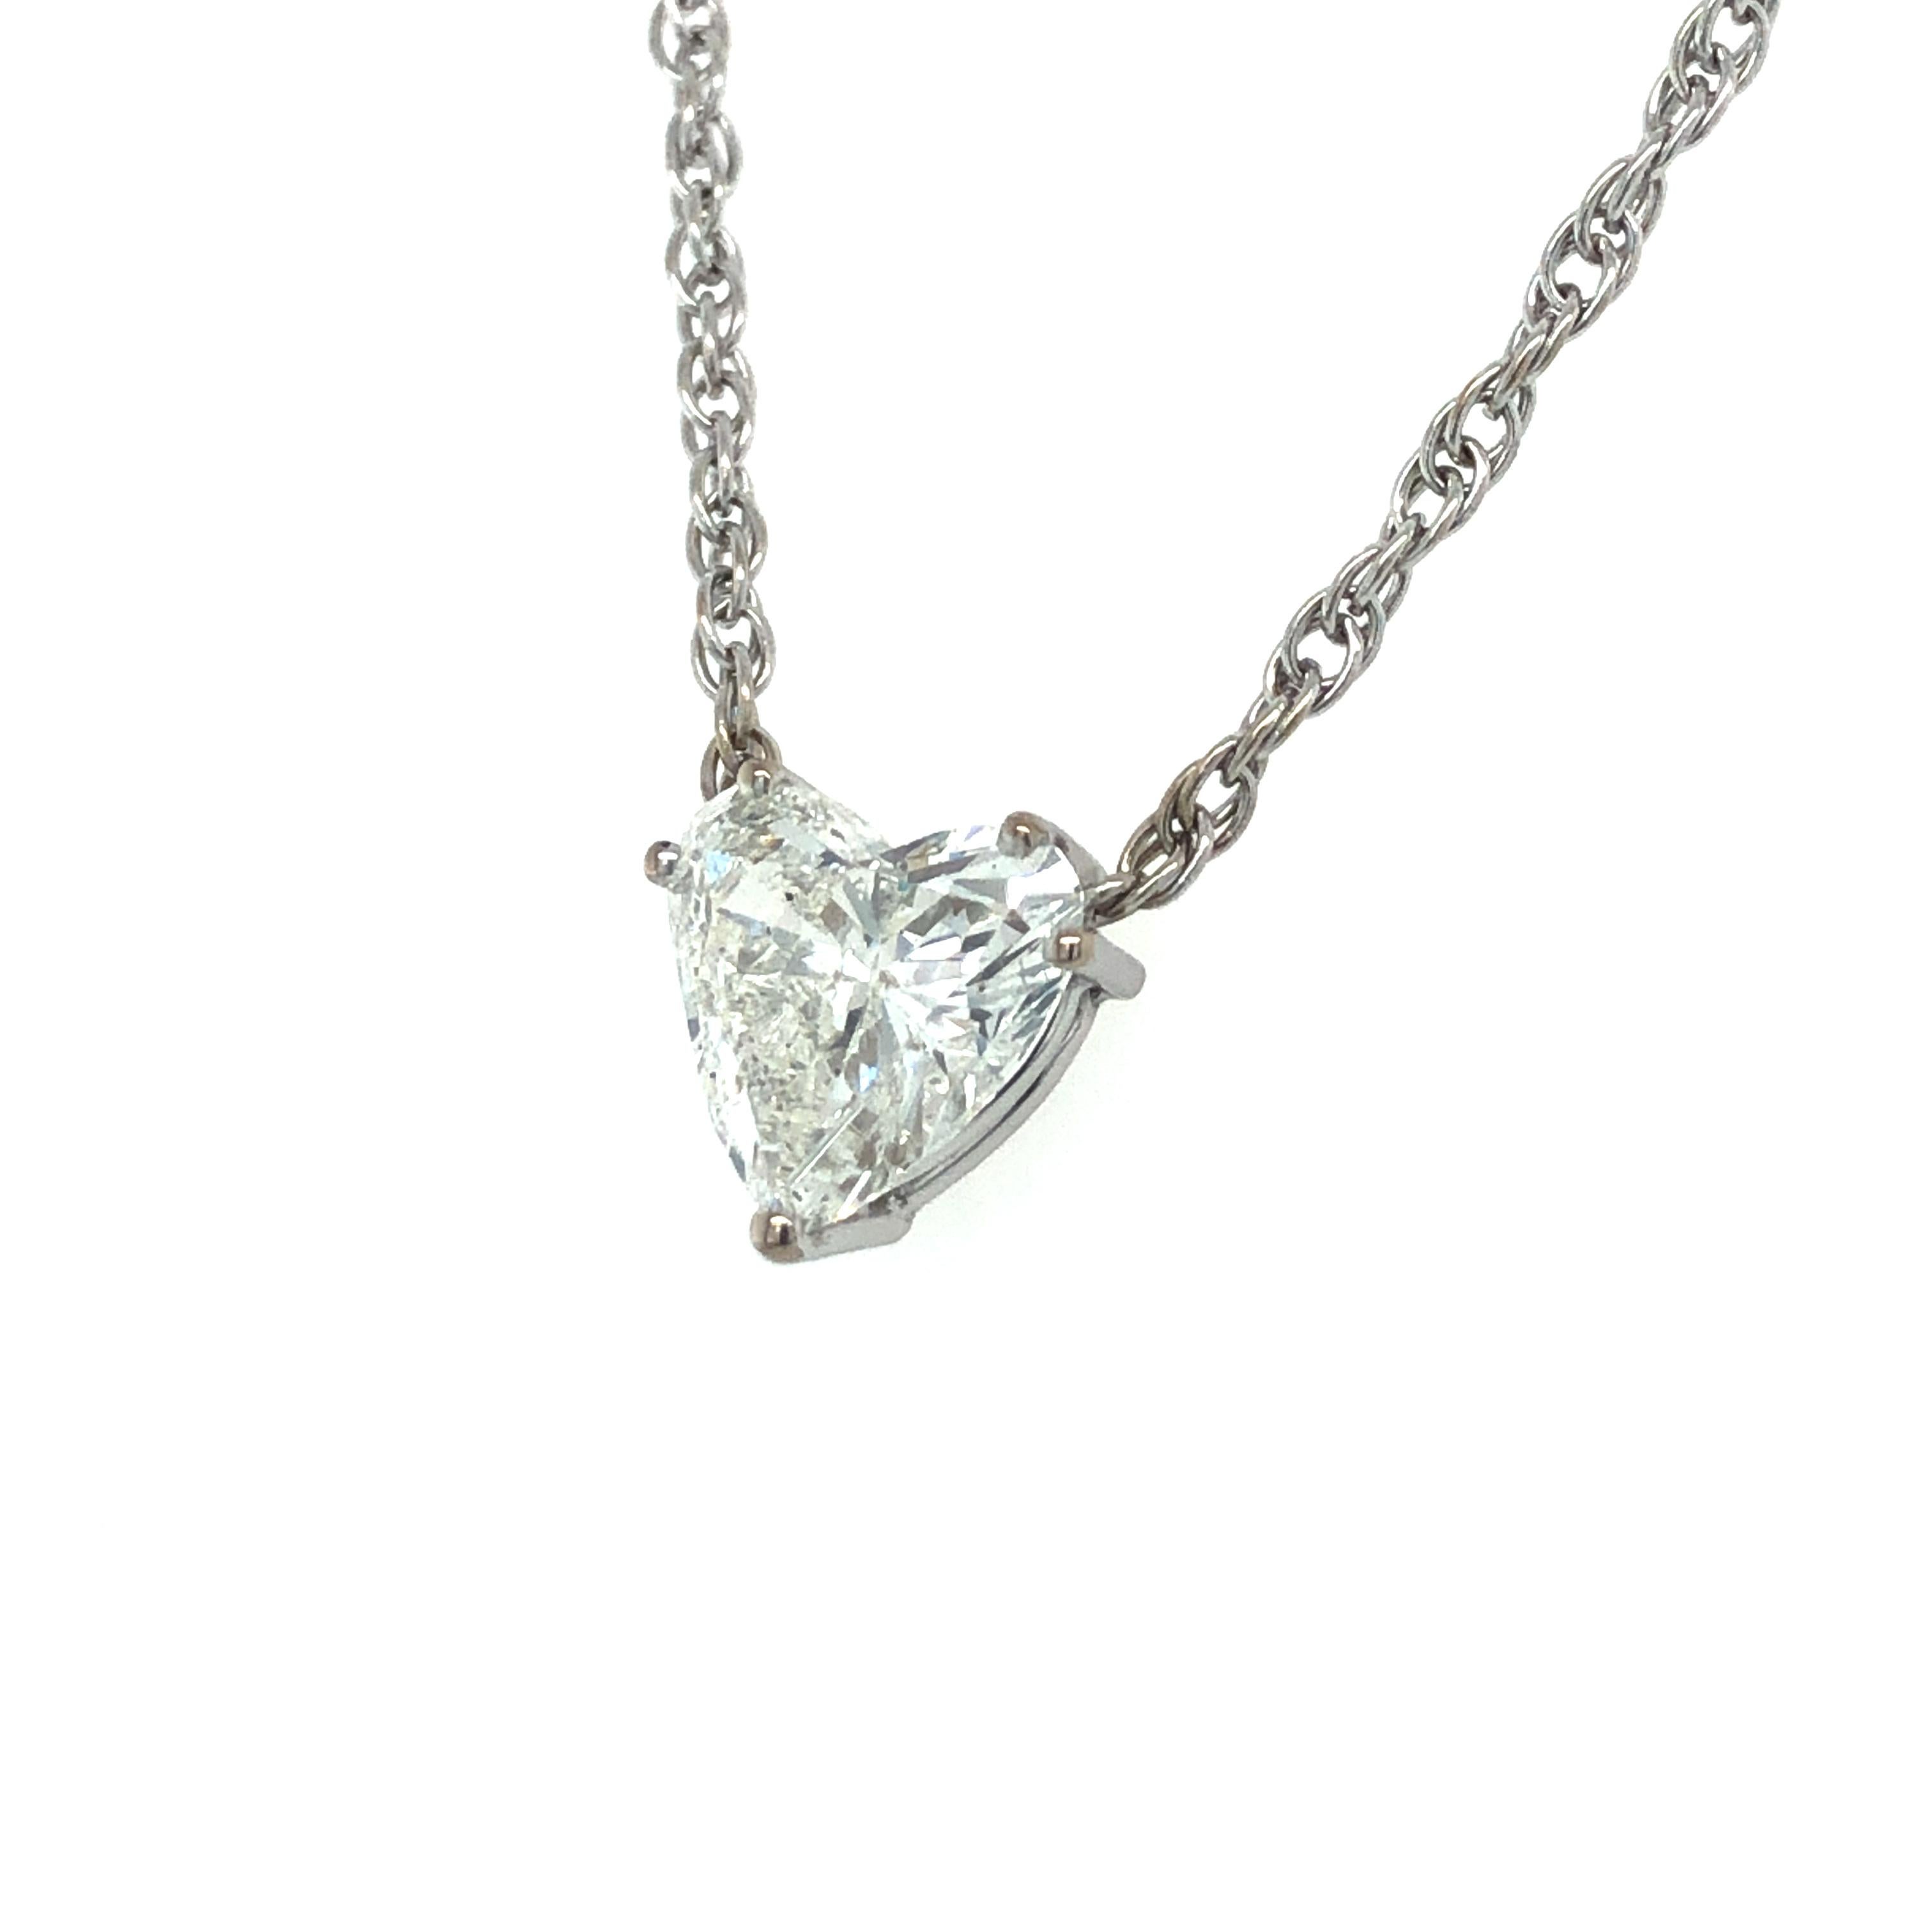 This beautiful solitaire necklace by Swiss jeweller Bucherer features a 2.54 carat heart-shaped diamond of I colour and i1 clarity. Custom made and handcrafted prong setting in 18 karat white gold, mounted on a fine Prince of Wales chain (rope